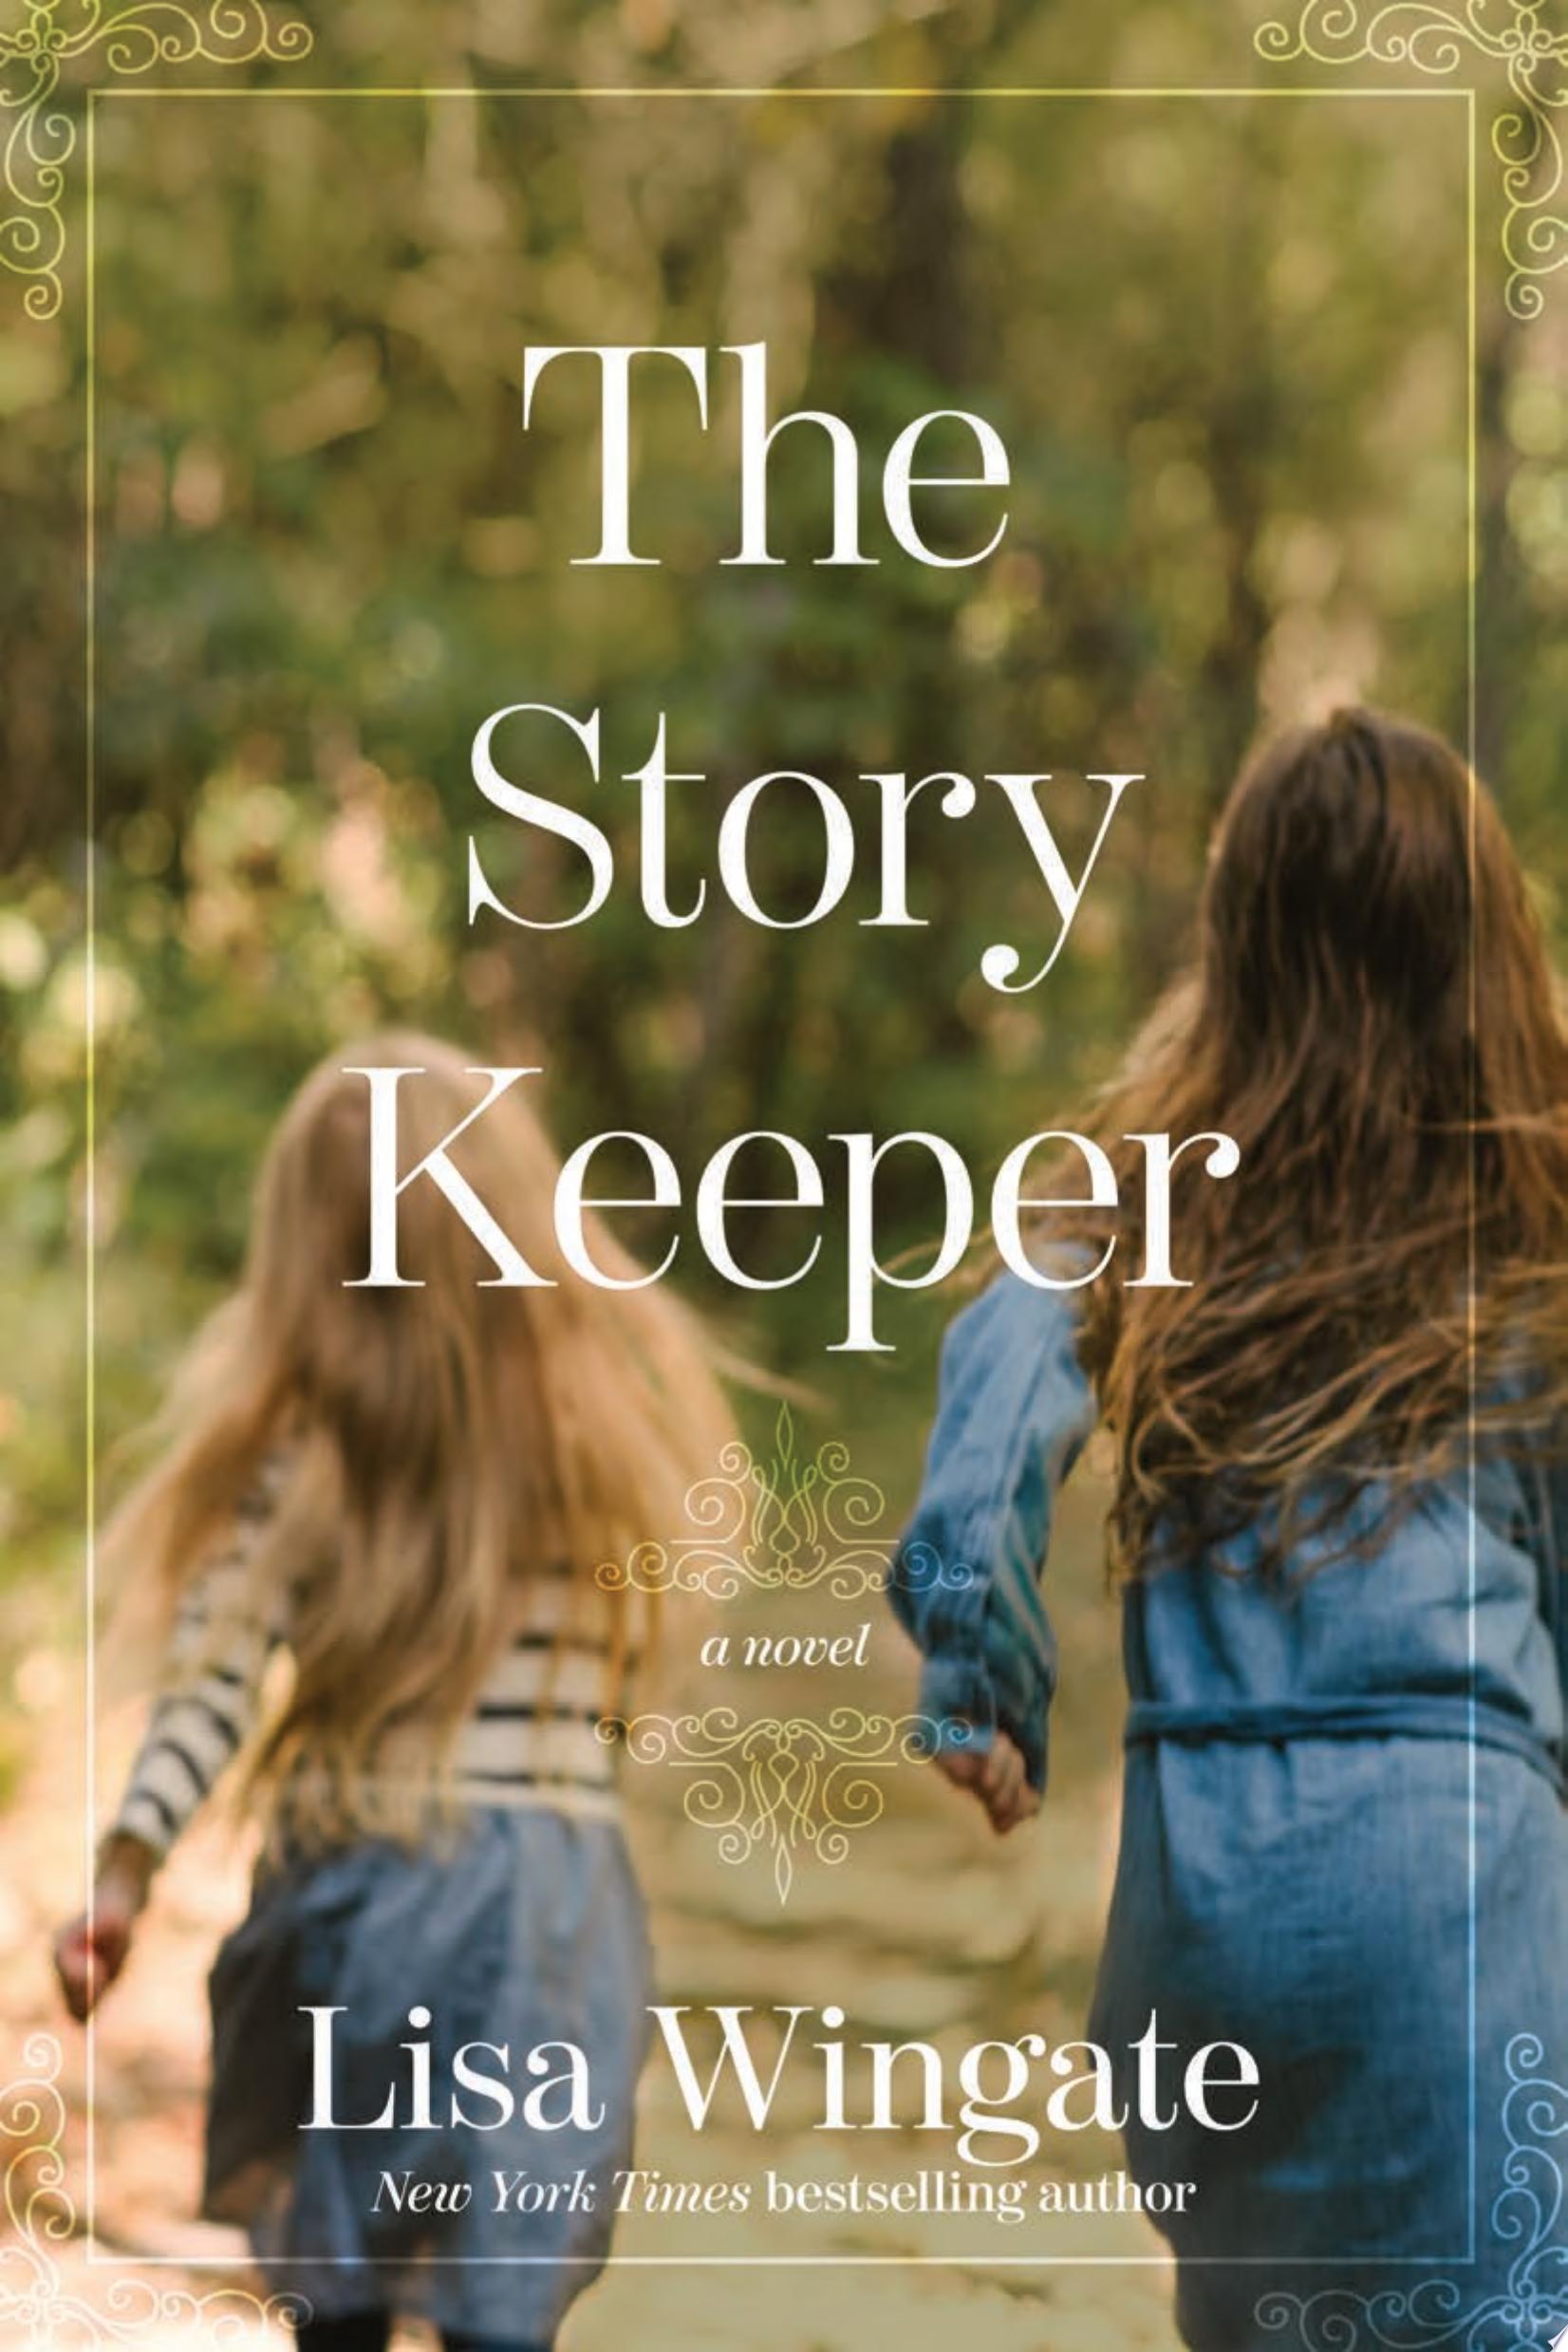 Image for "The Story Keeper"